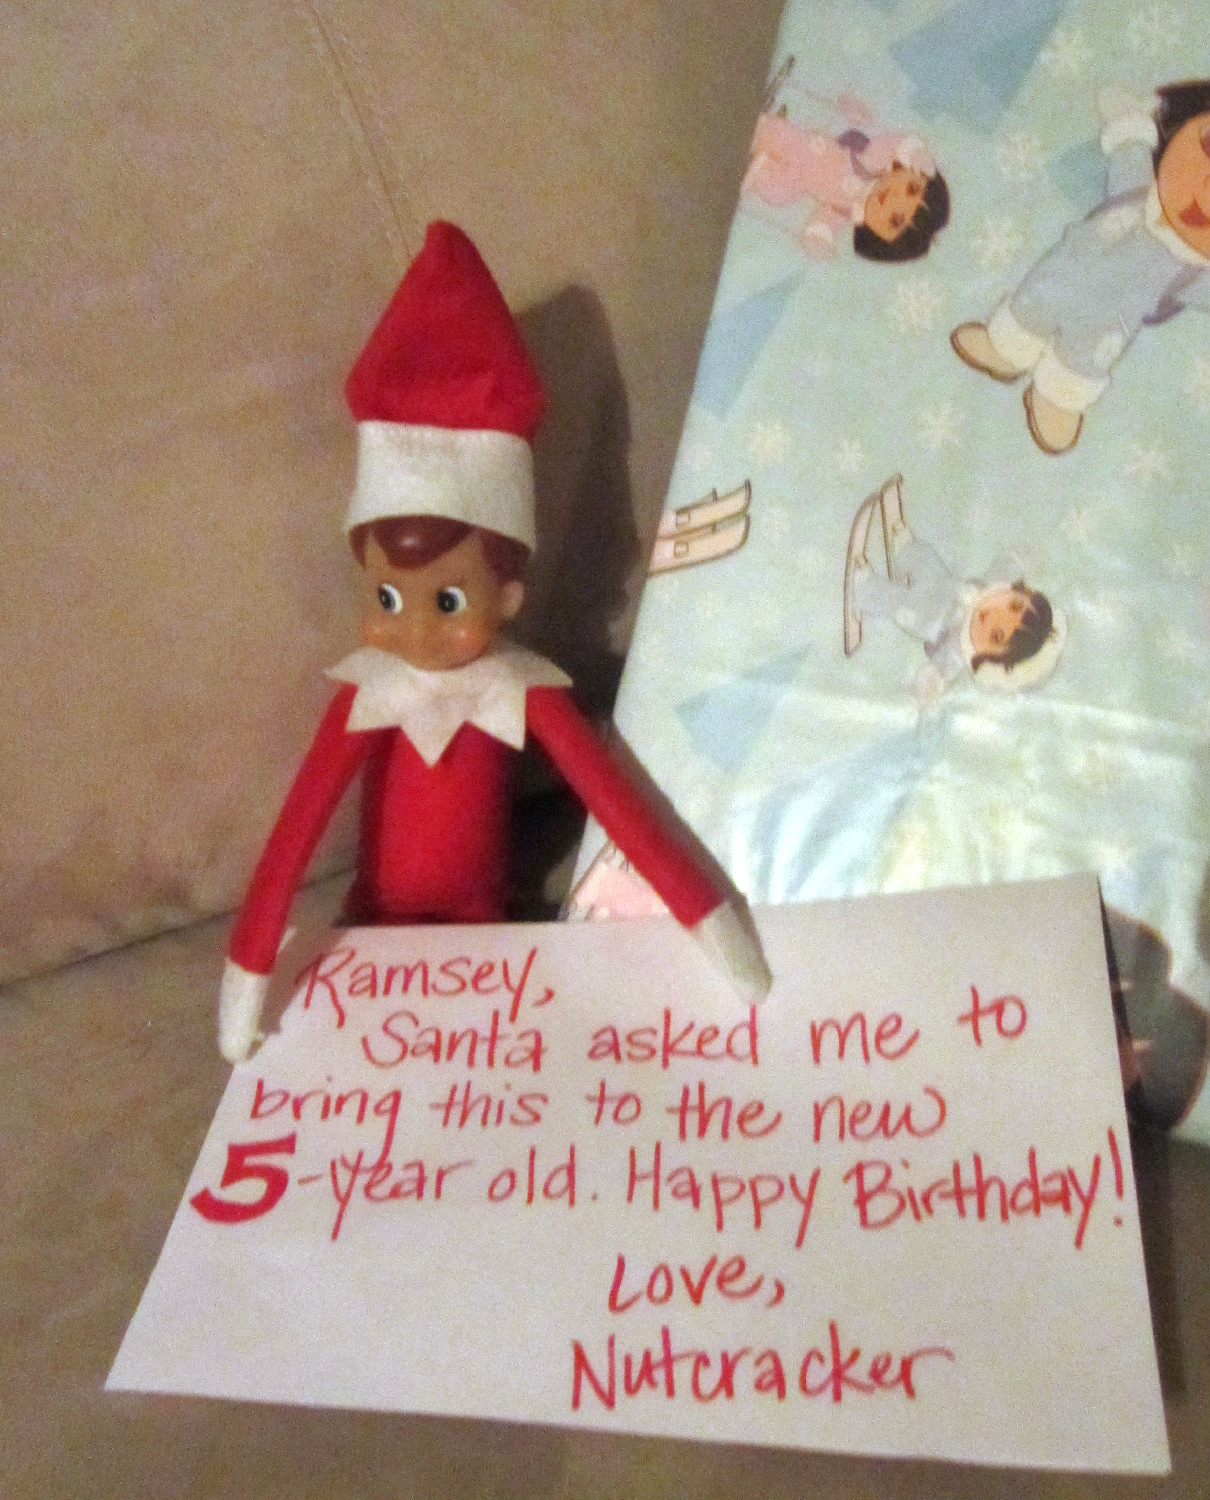 Lizzi's Creations: This Week in Elf on a Shelf #2